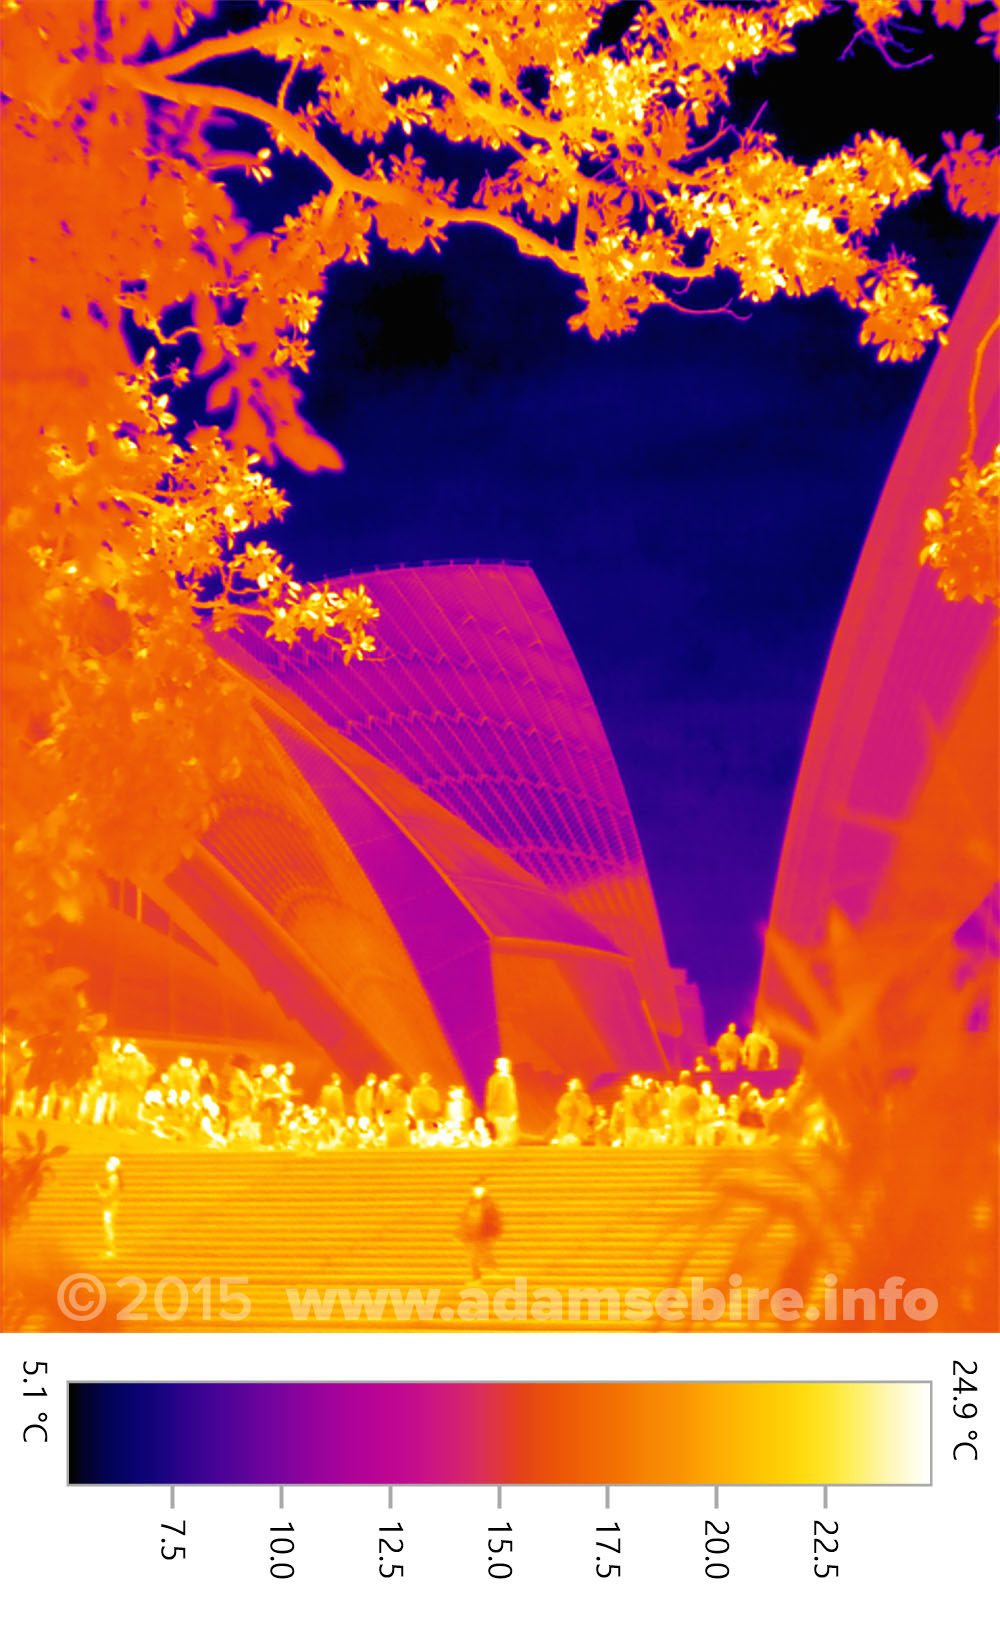 Sydney Opera House infrared thermal image showing prinicple of white roofs as energy efficient sustainable design